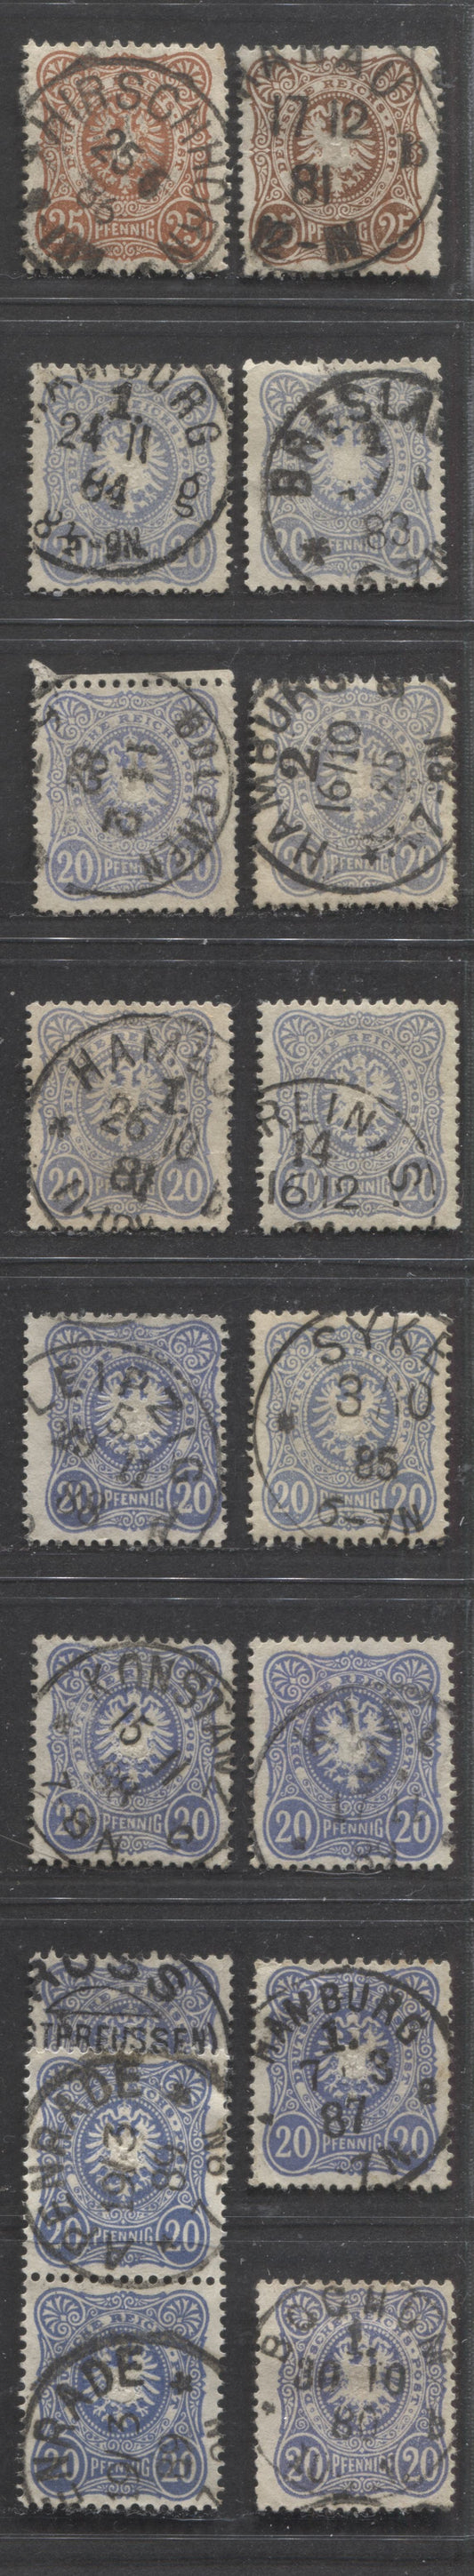 Lot 425 Germany SC#40/41b 1880-1883 Numeral & Eagle Pfenning Issue, All With SON Town Cancels, Including Apenrade, Denmark, 15 Fine & VF Used Singles & Pair, Click on Listing to See ALL Pictures, Estimated Value $40